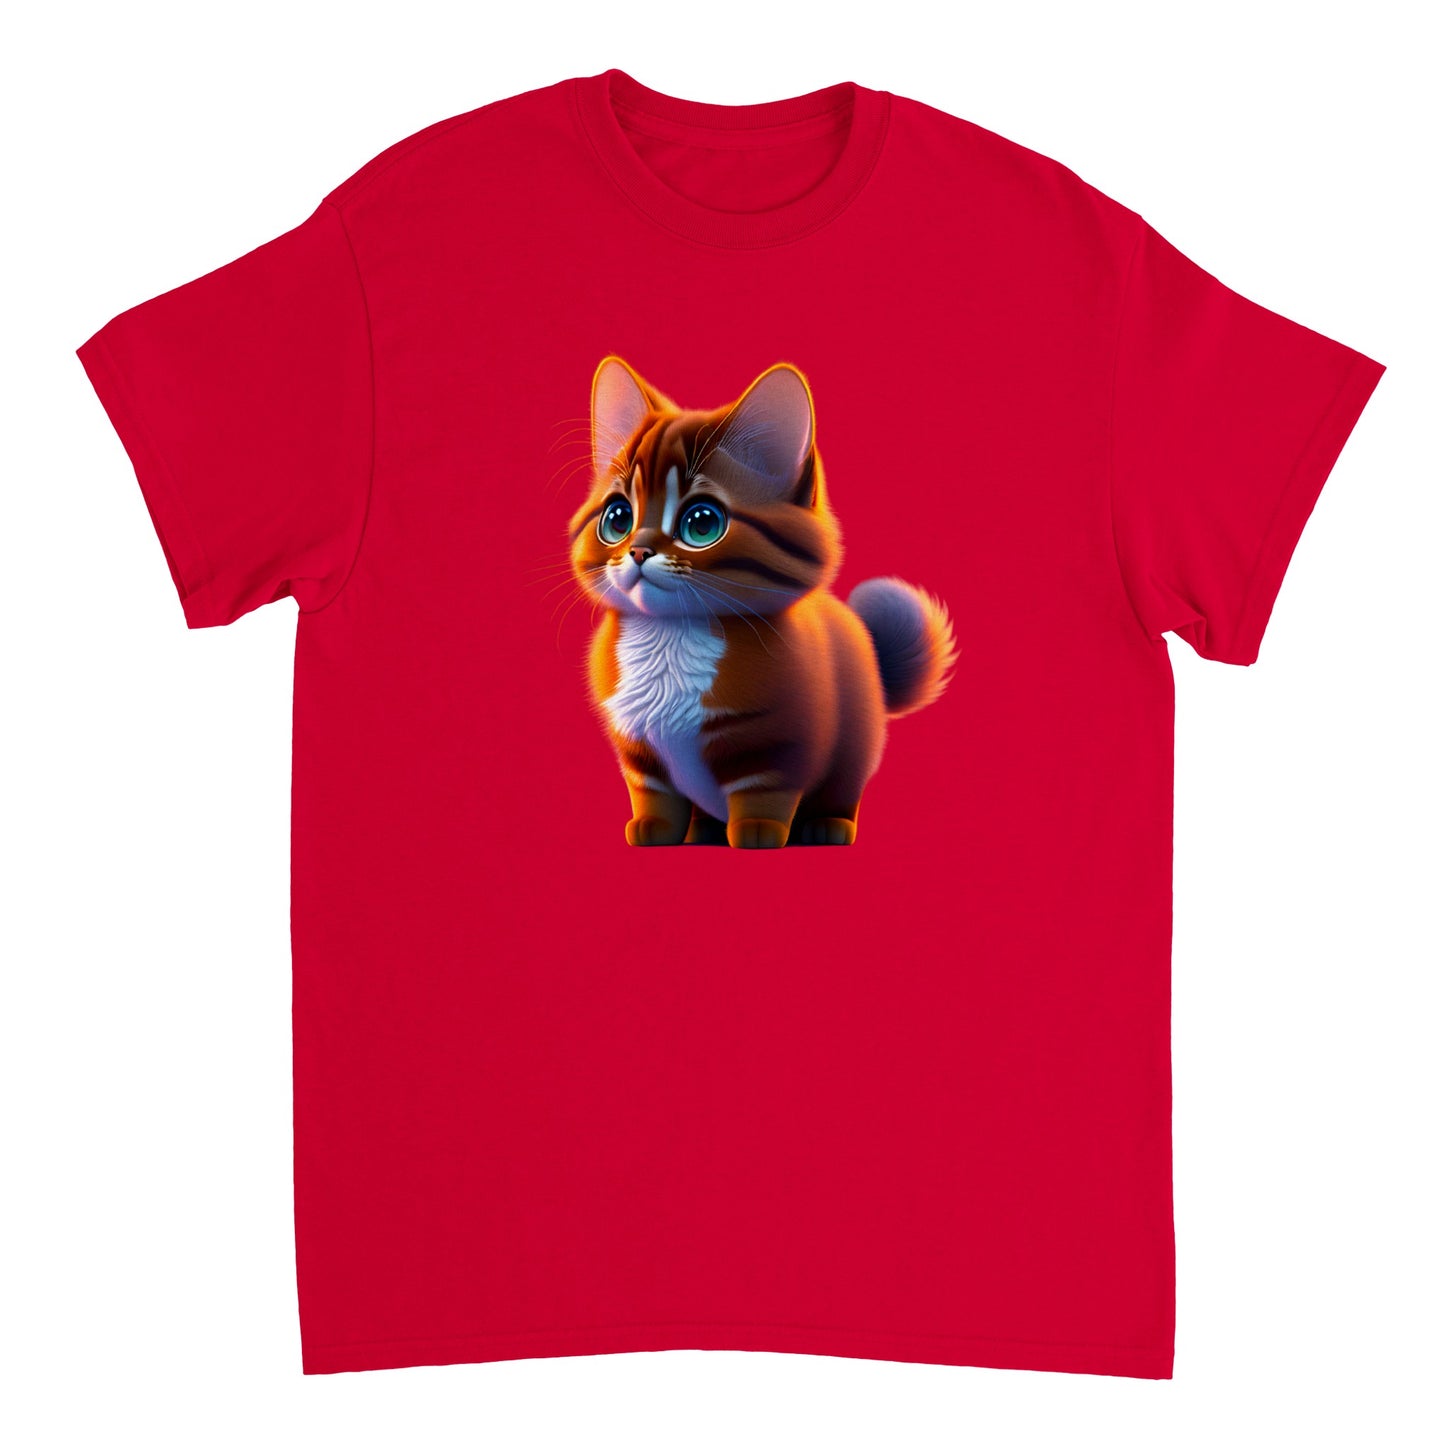 Adorable, Cool, Cute Cats and Kittens Toy - Heavyweight Unisex Crewneck T-shirt 12